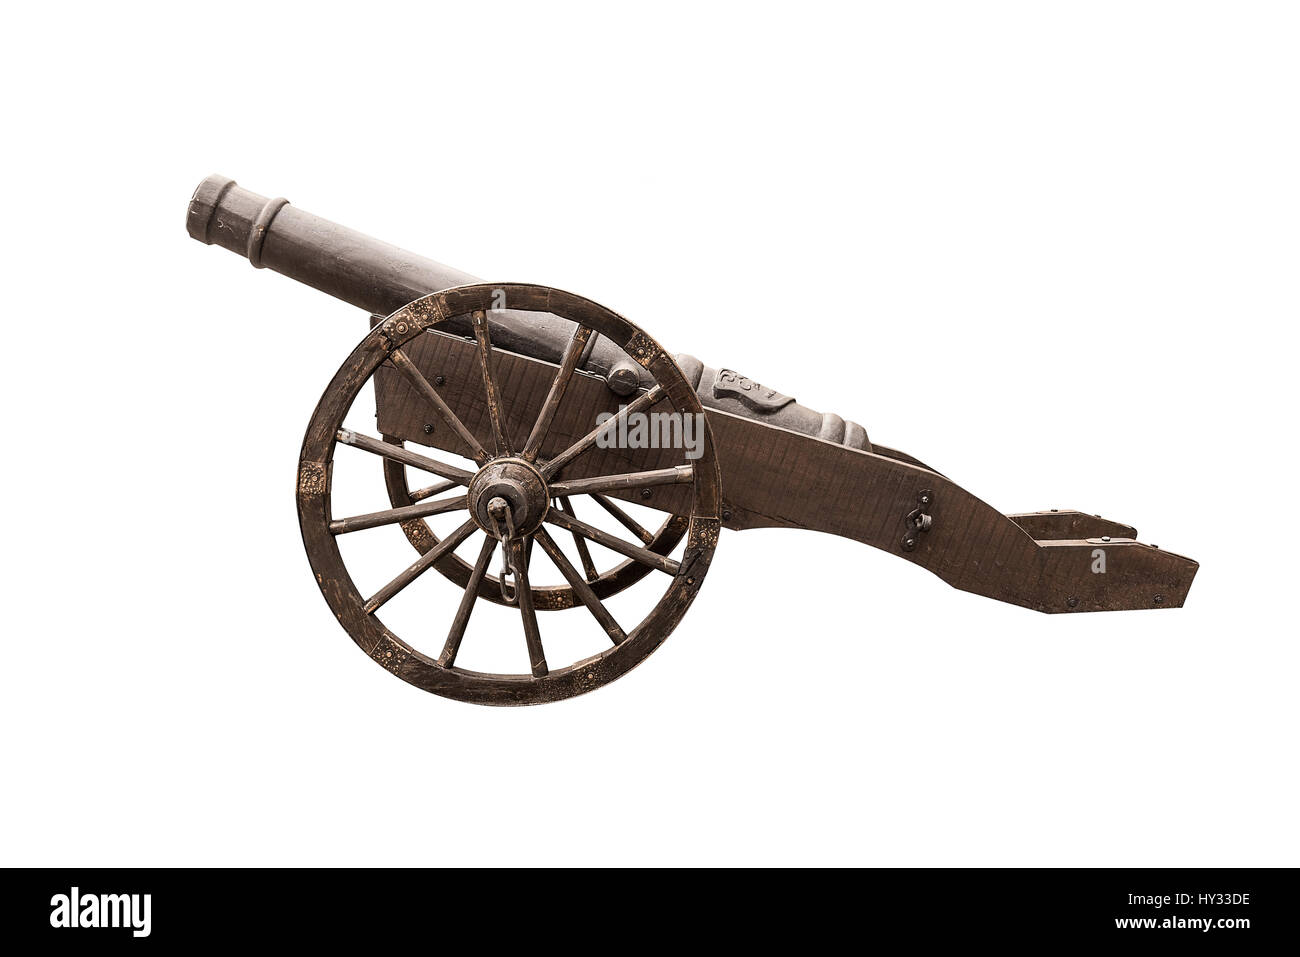 Antique cannon isolated on a white background. Stock Photo